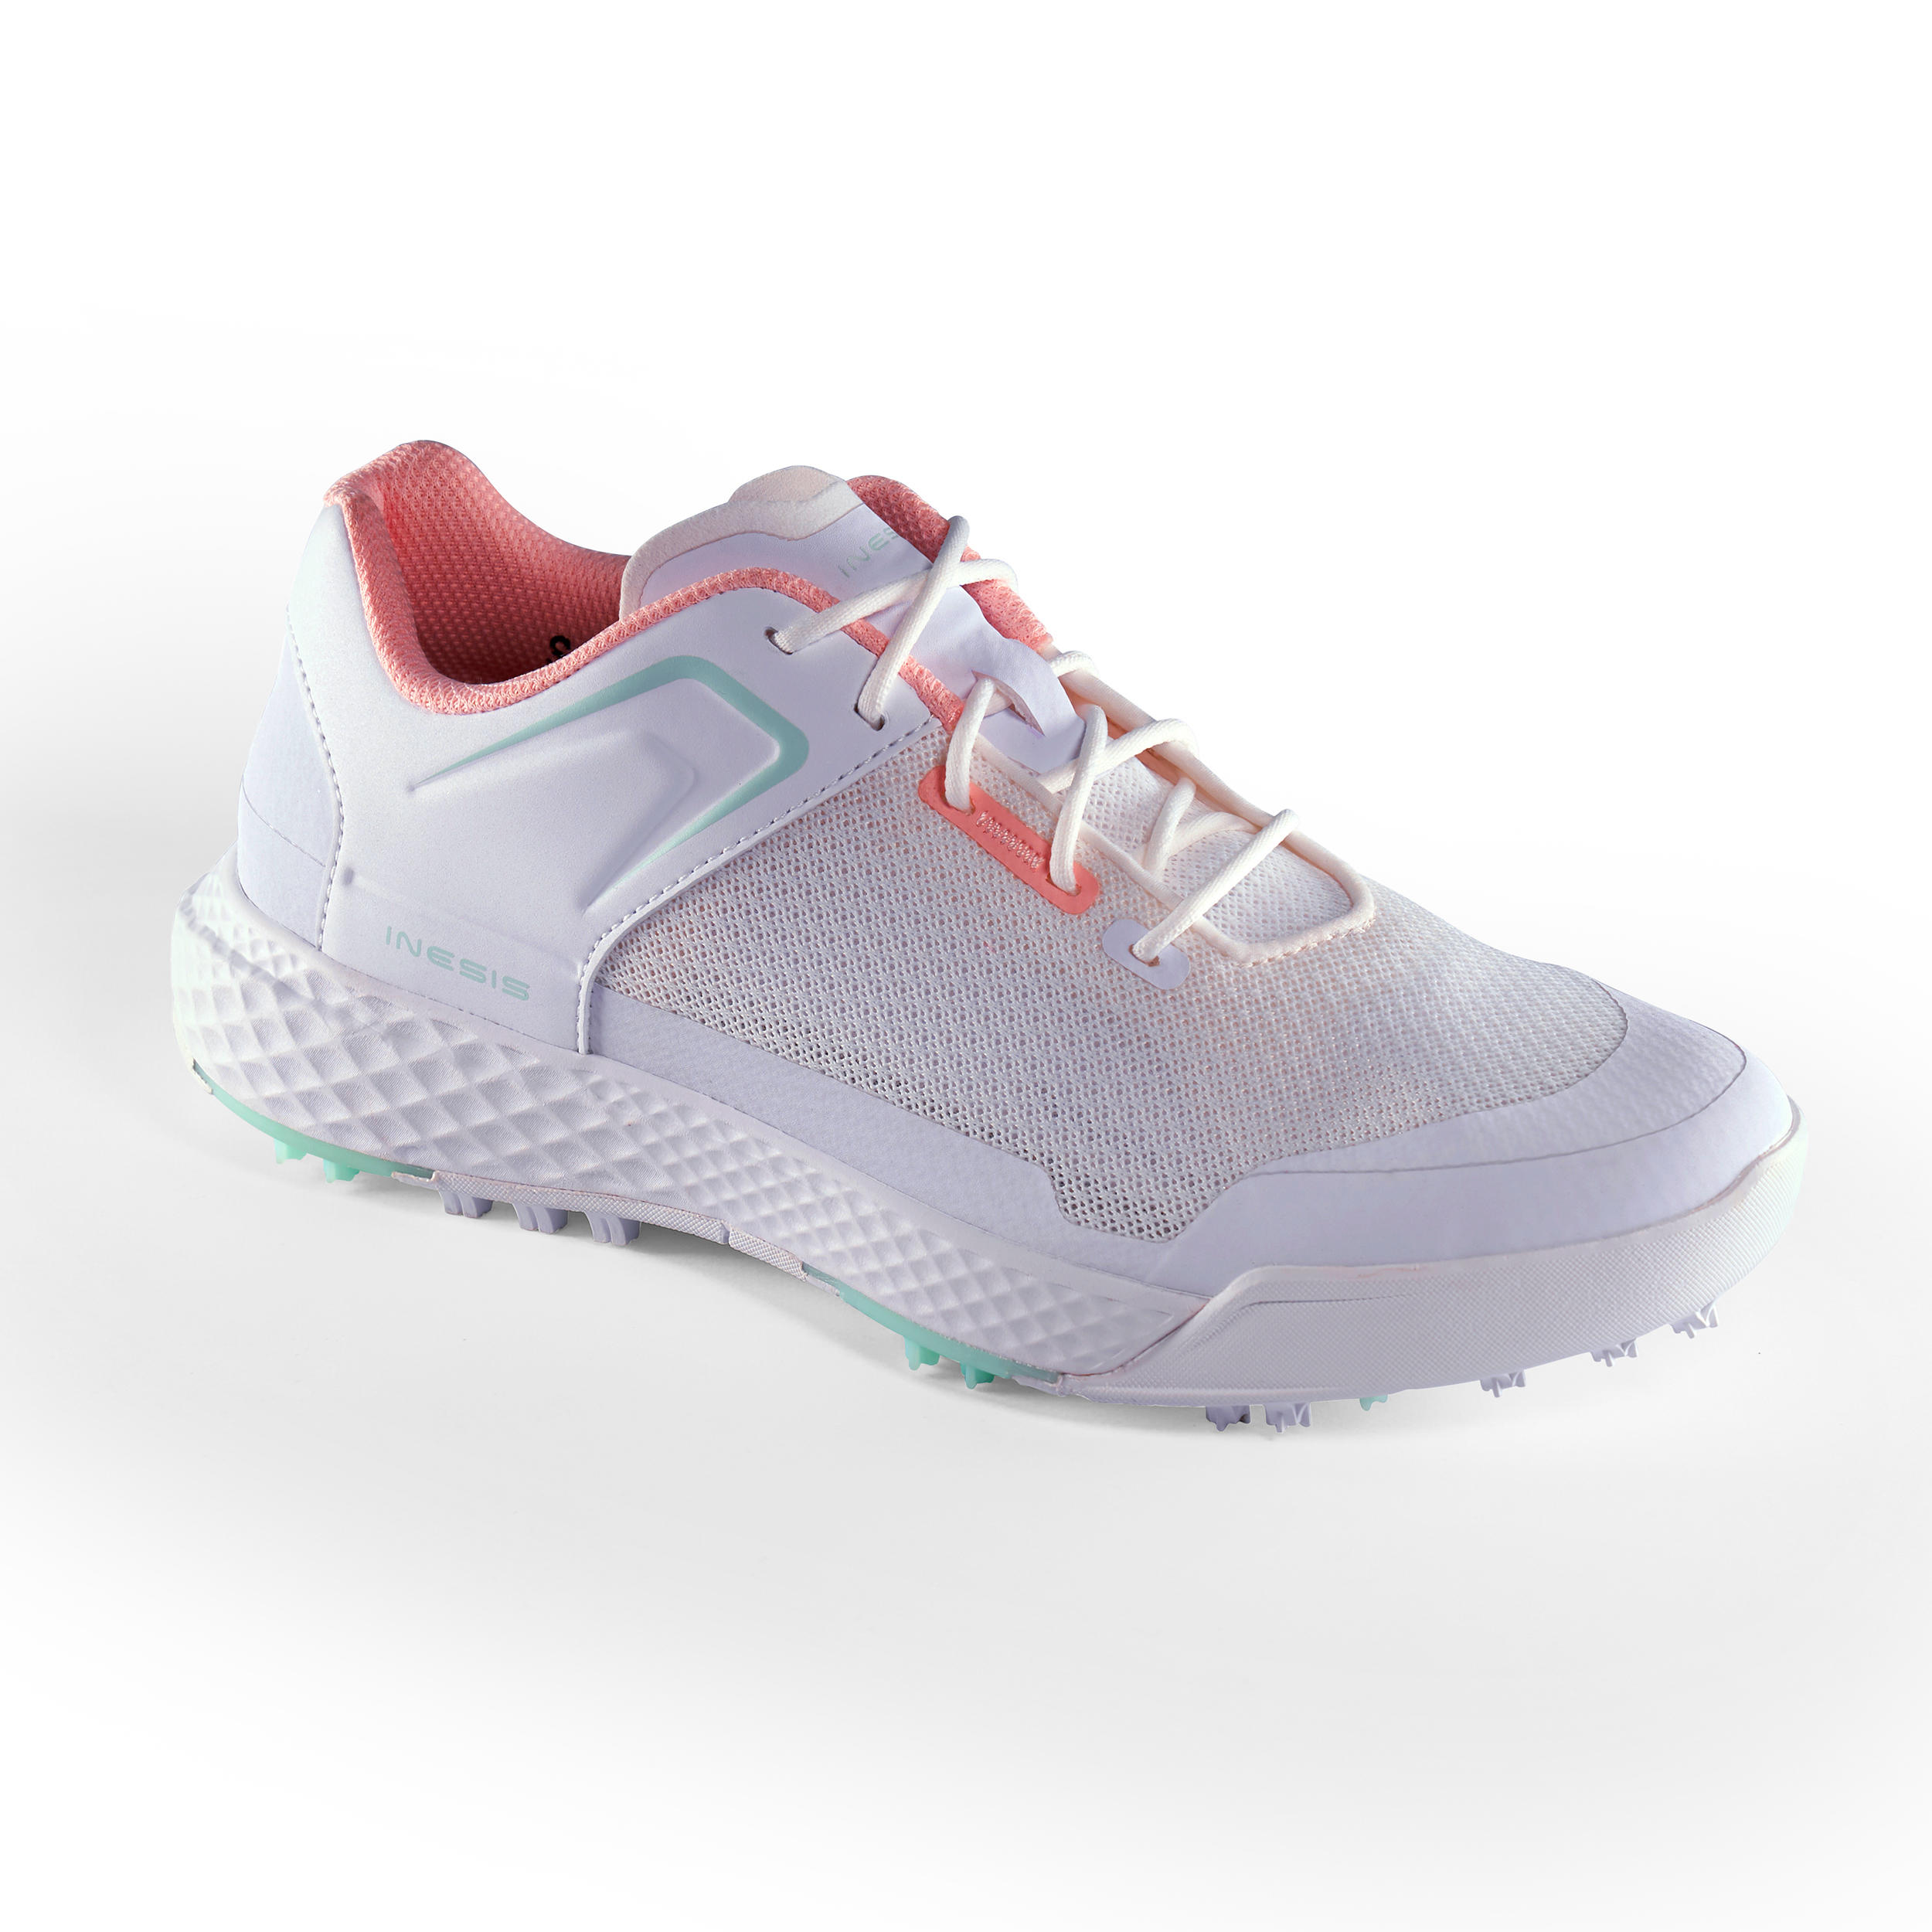 WOMEN'S GOLF SHOES DRY GRIP WHITE